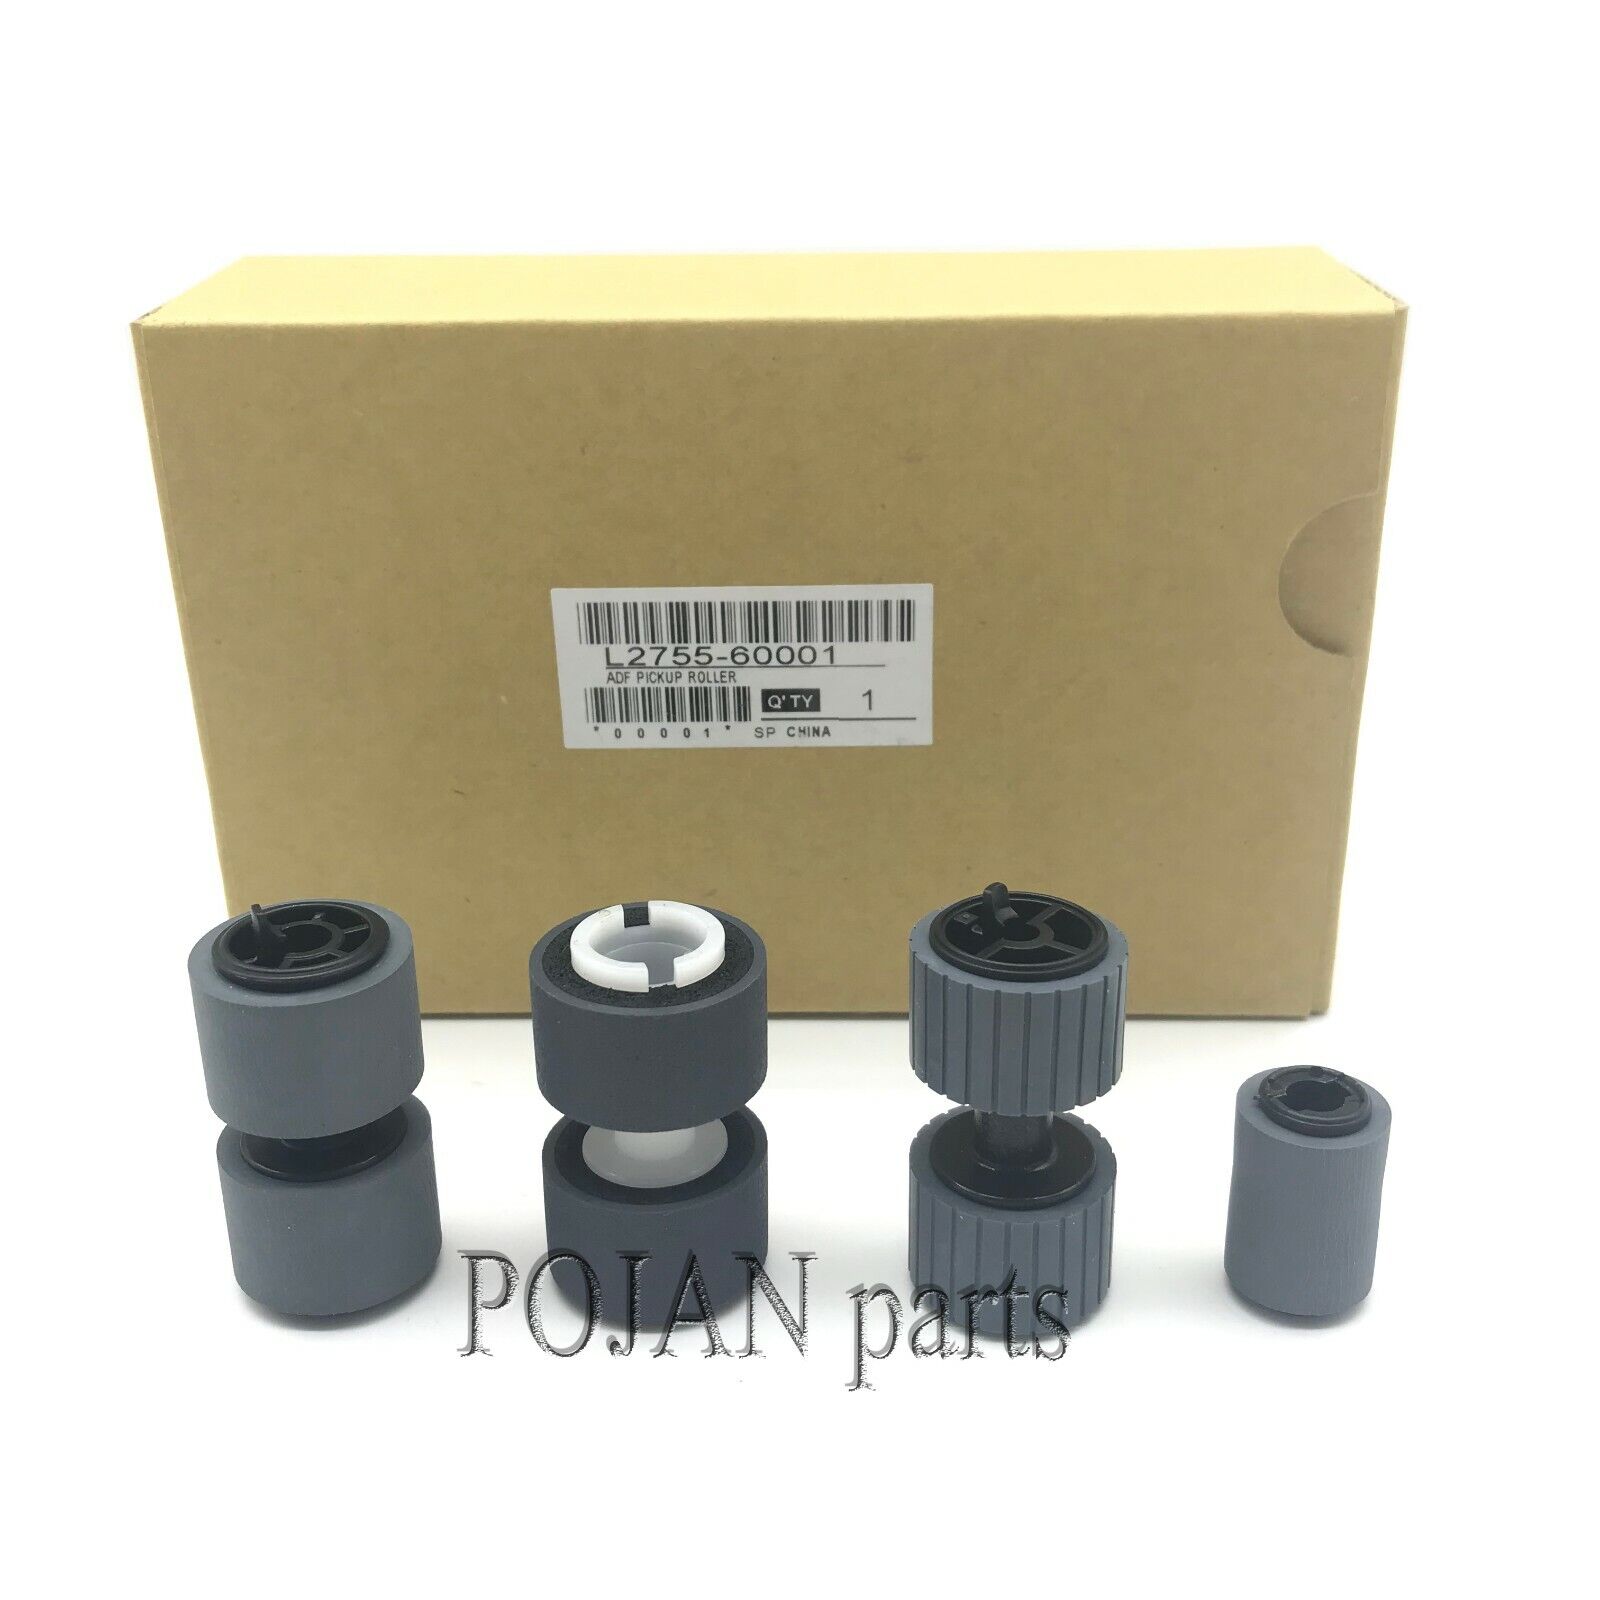 L2755-60001 ADF Roller Replacement Kit Fit HP Scanjet 5000 S4 Scanjet 7000 S3 